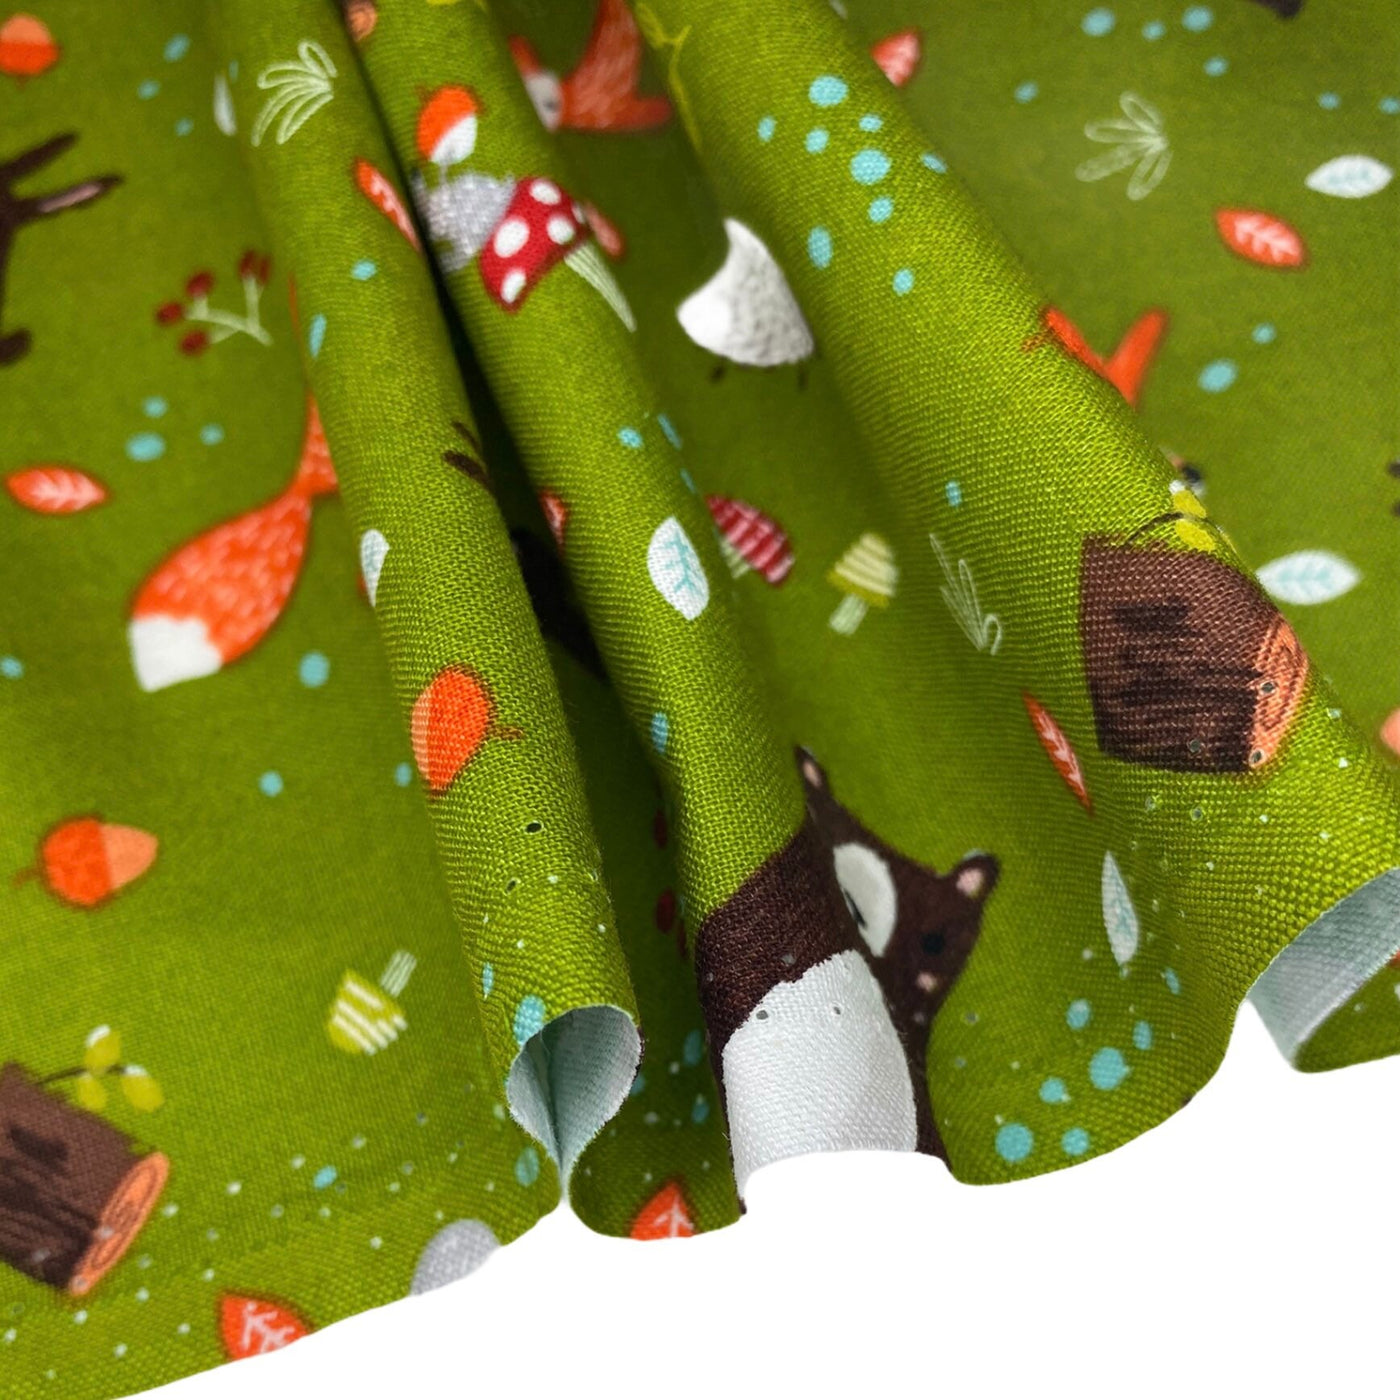 Quilting Cotton - Forest Friends - Green - Remnant